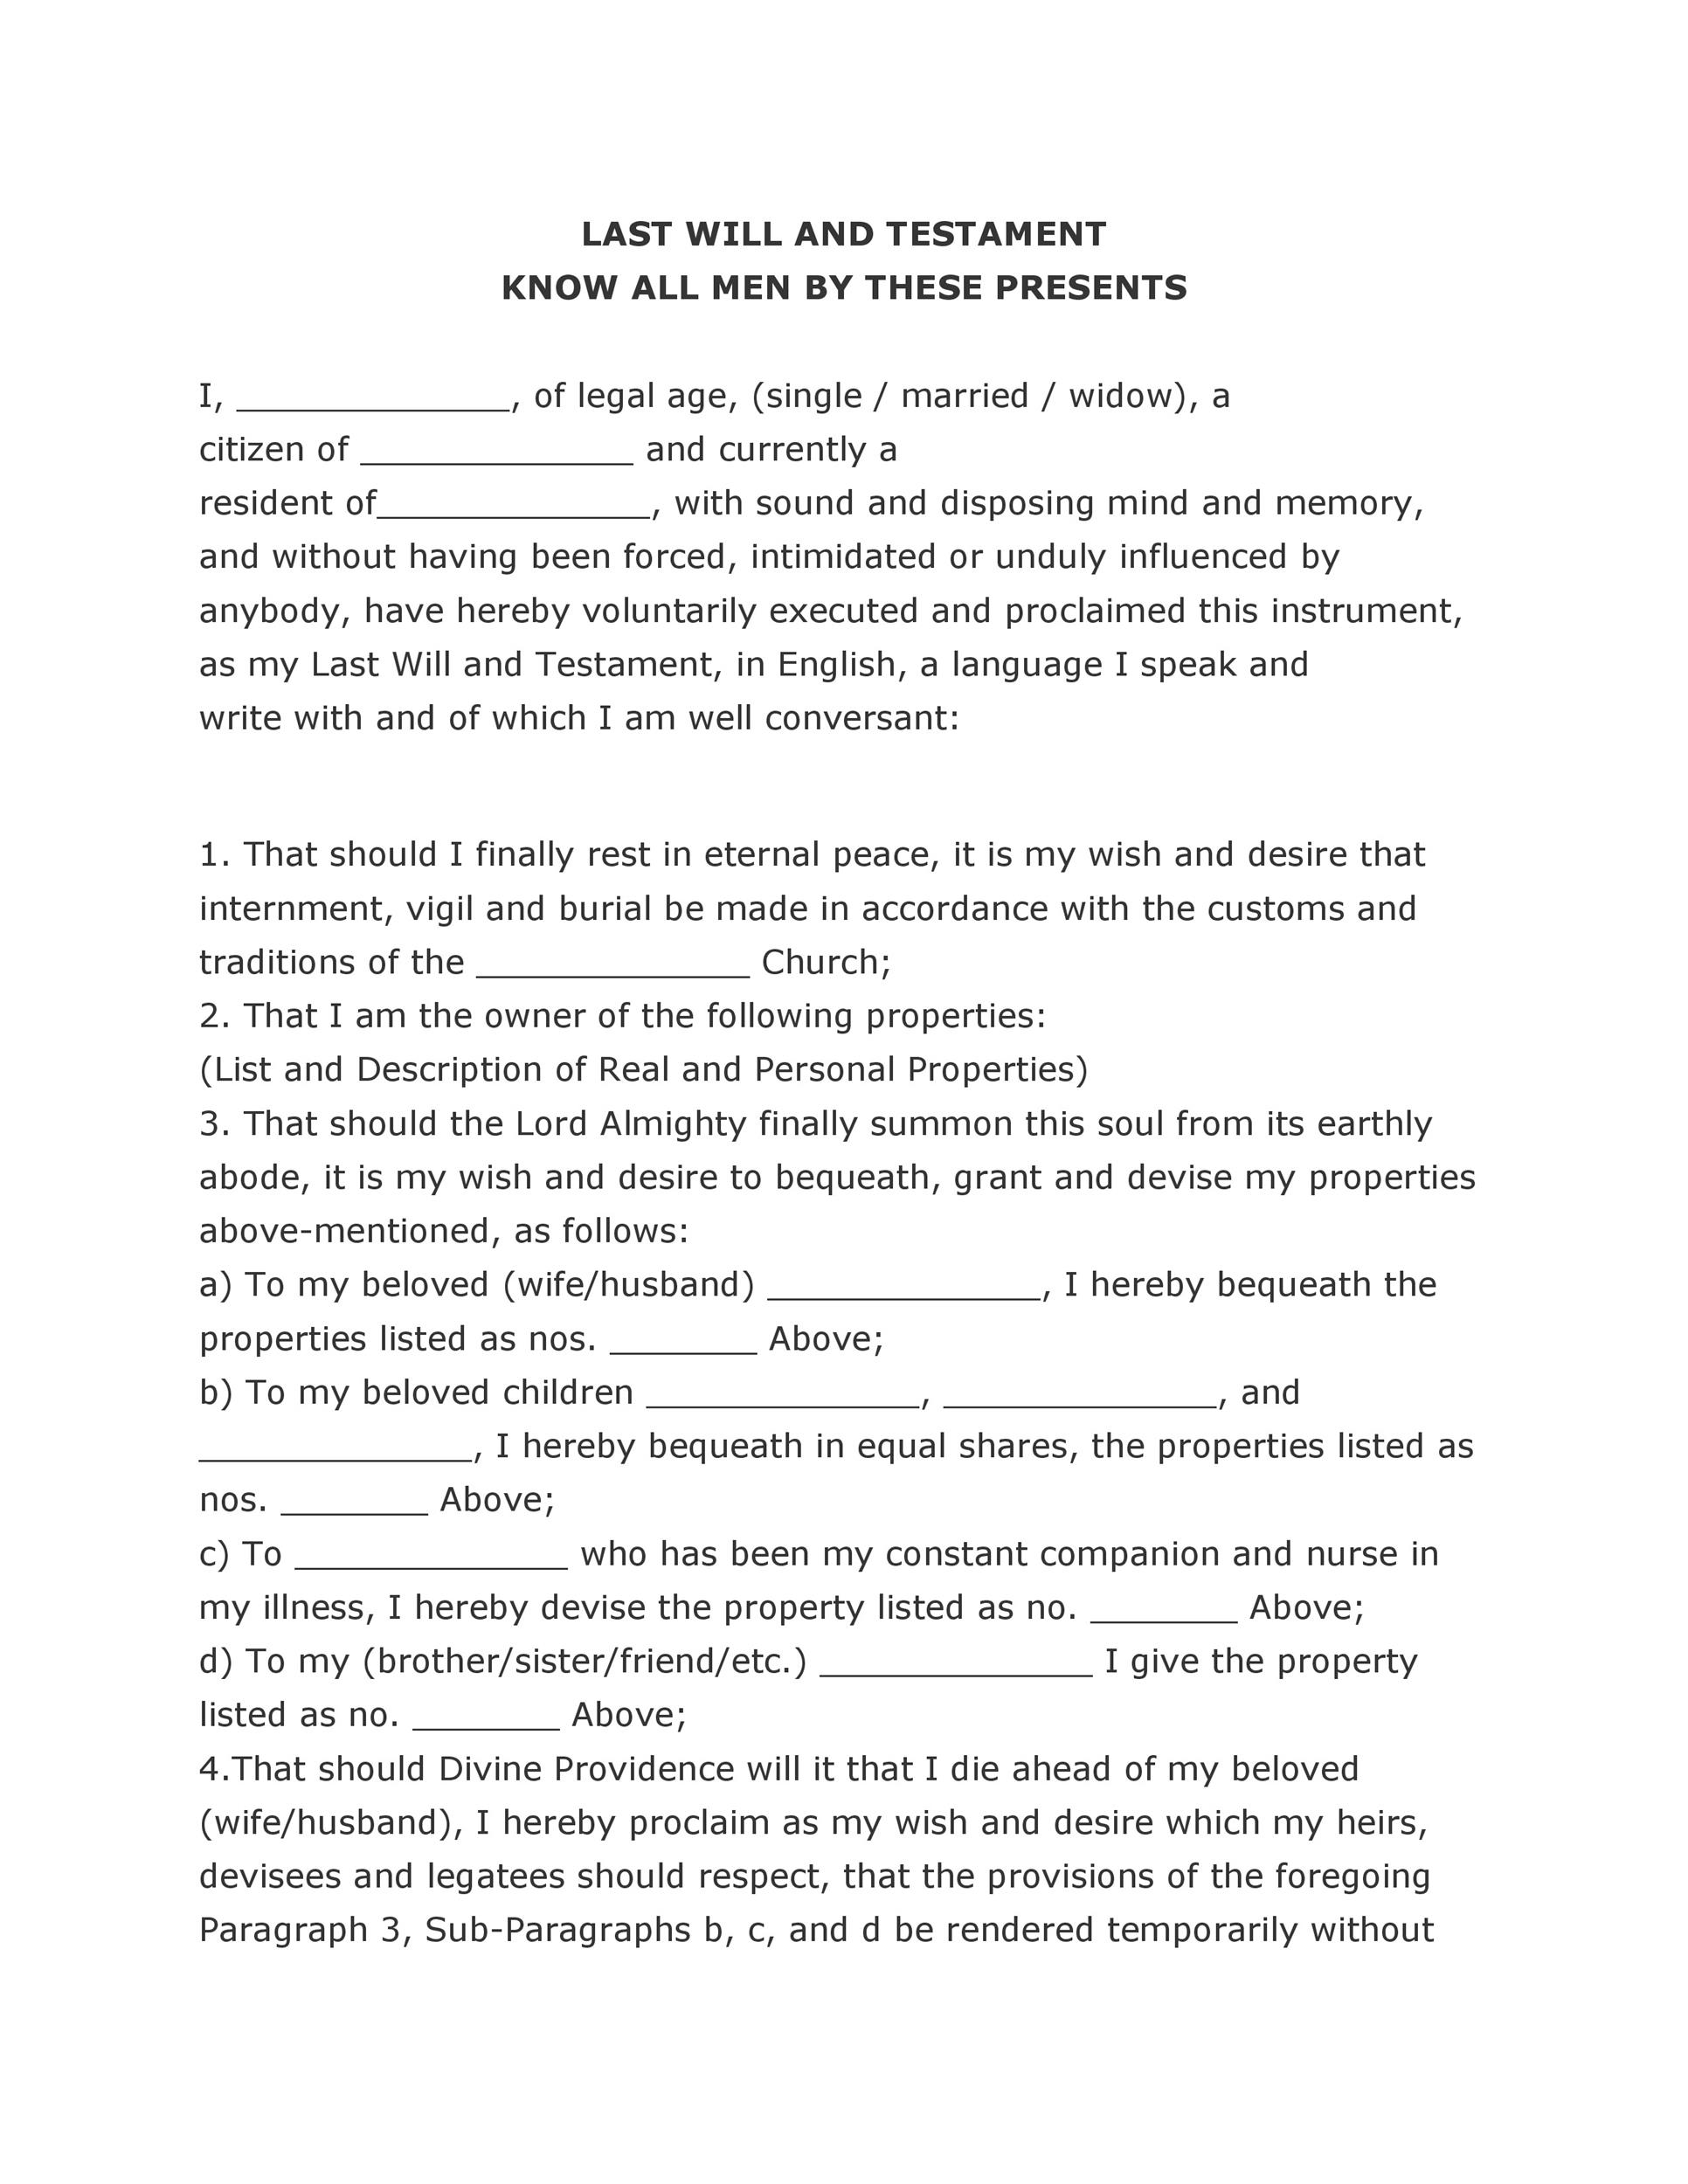 39 Last Will and Testament Forms & Templates ᐅ TemplateLab